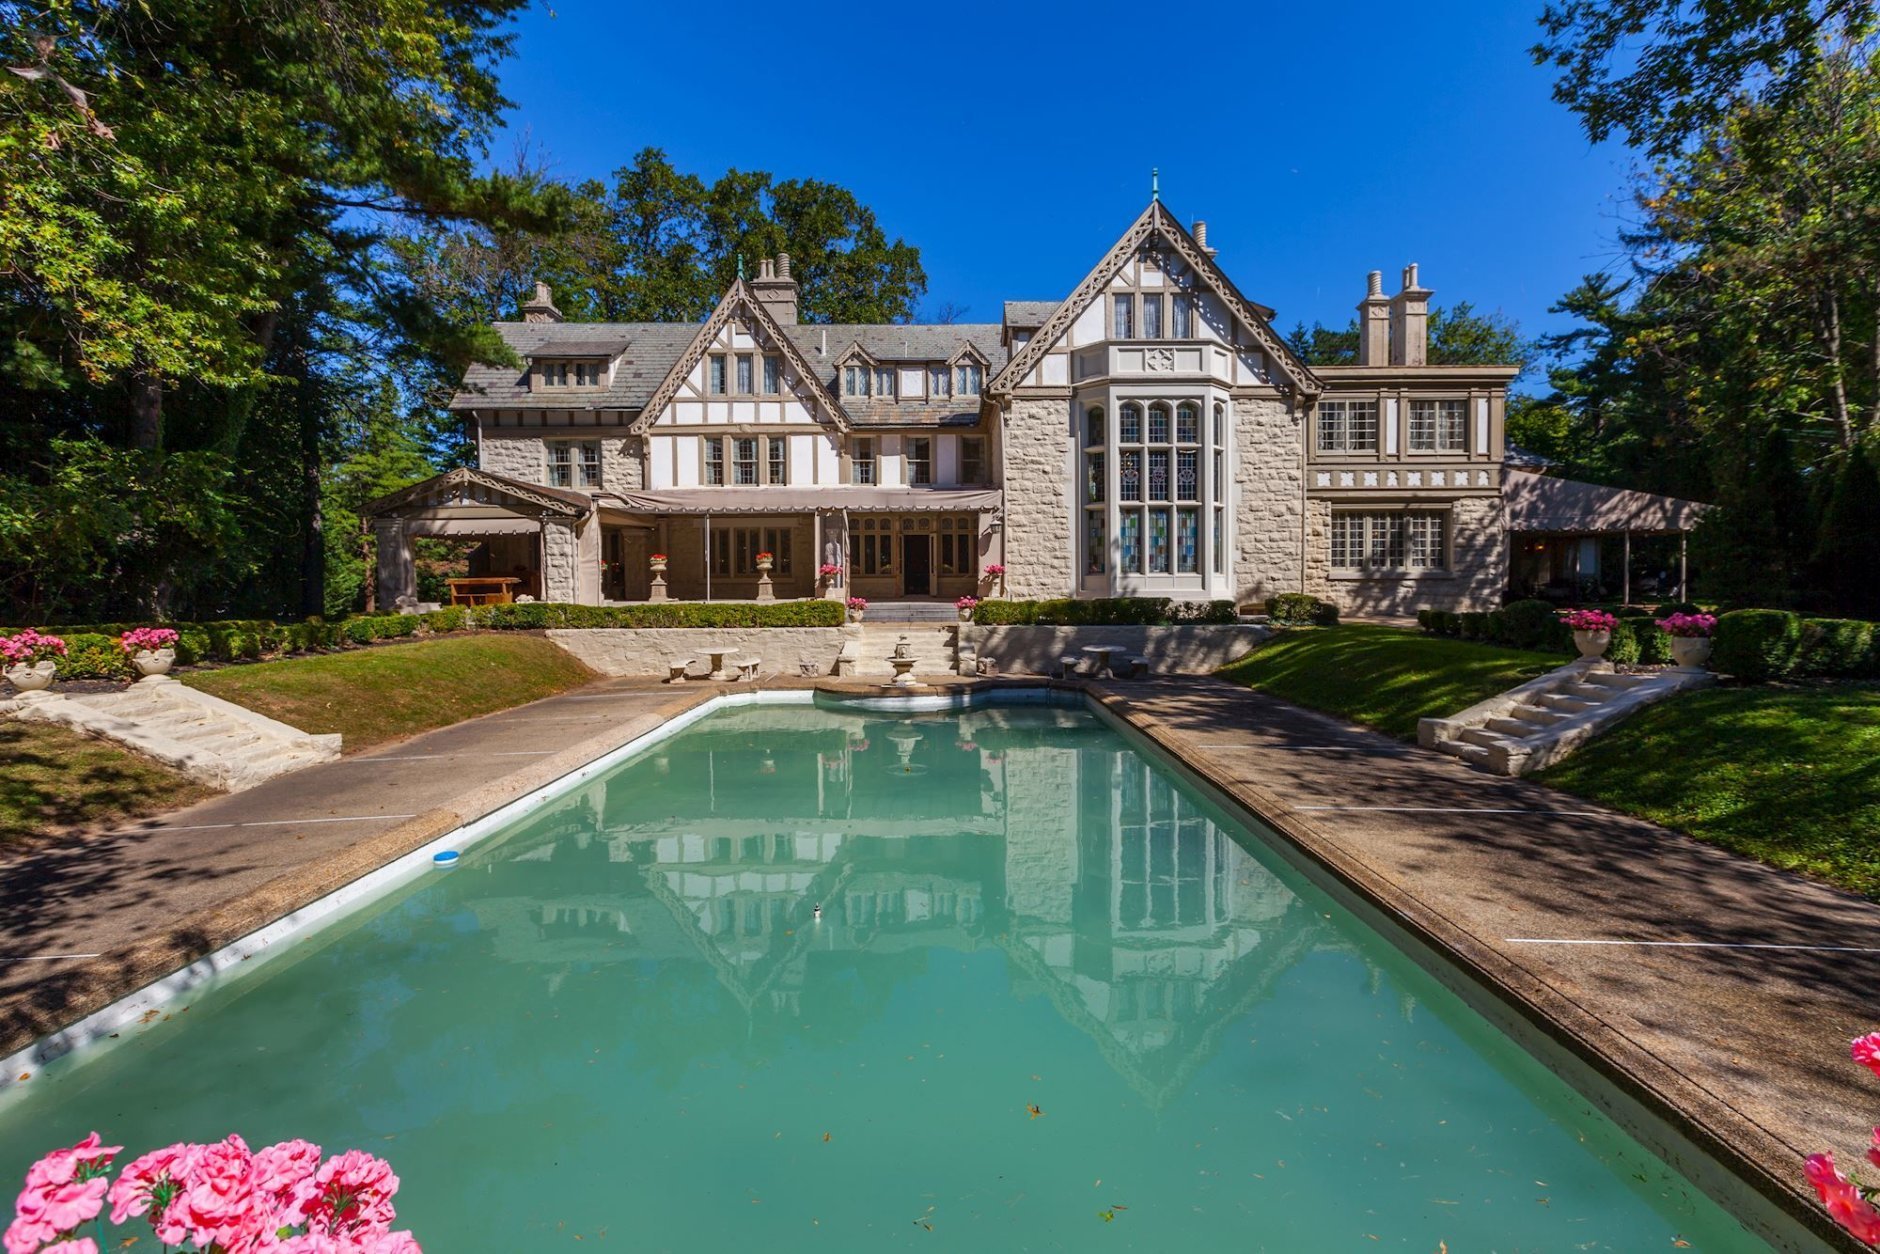 The estate, named “Ishpiming,” at 9 Chevy Chase Circle is one of the first homes built by the Chevy Chase Land Company, and was built in 1894. The 12,900-square-foot home sits on a 1.9-acre estate. (Courtesy Long & Foster)